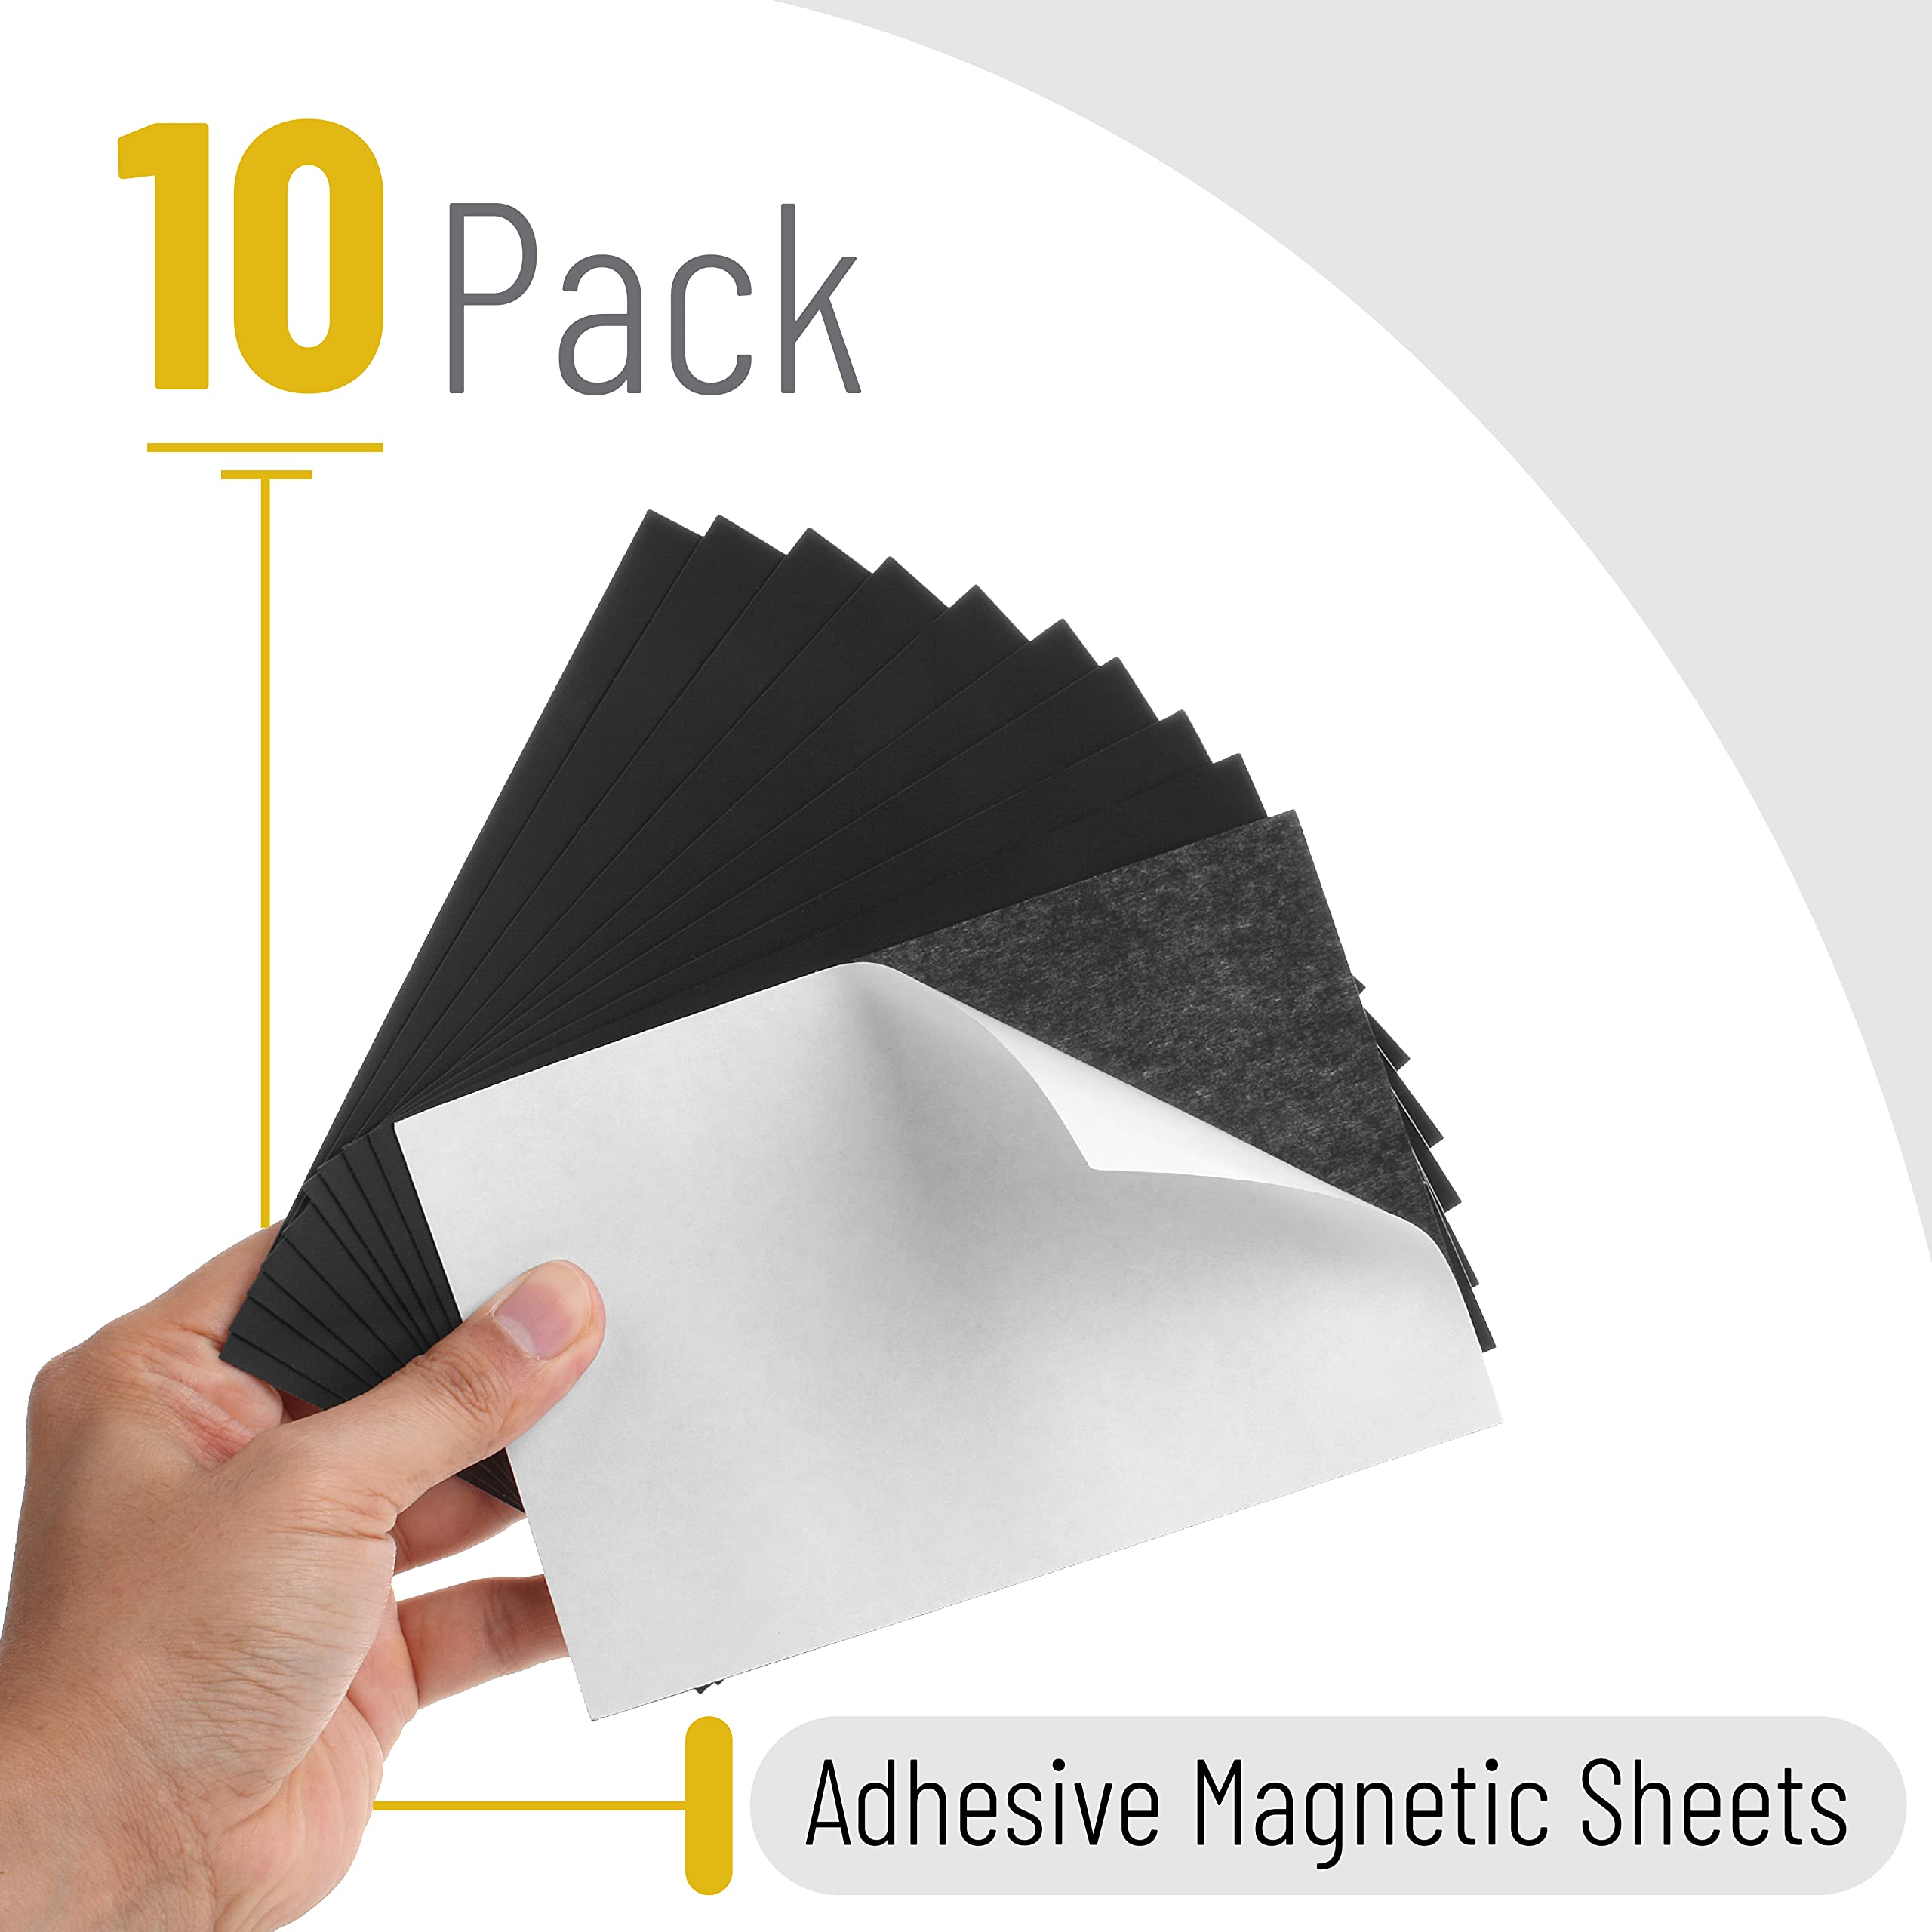 15 Pack Magnetic Sheets with Adhesive, 3.7 x 5.7 Adhesive Magnetic  Sheets, Cuttable Flexible Magnetic Sheet, Display Replacement Magnets  Backing